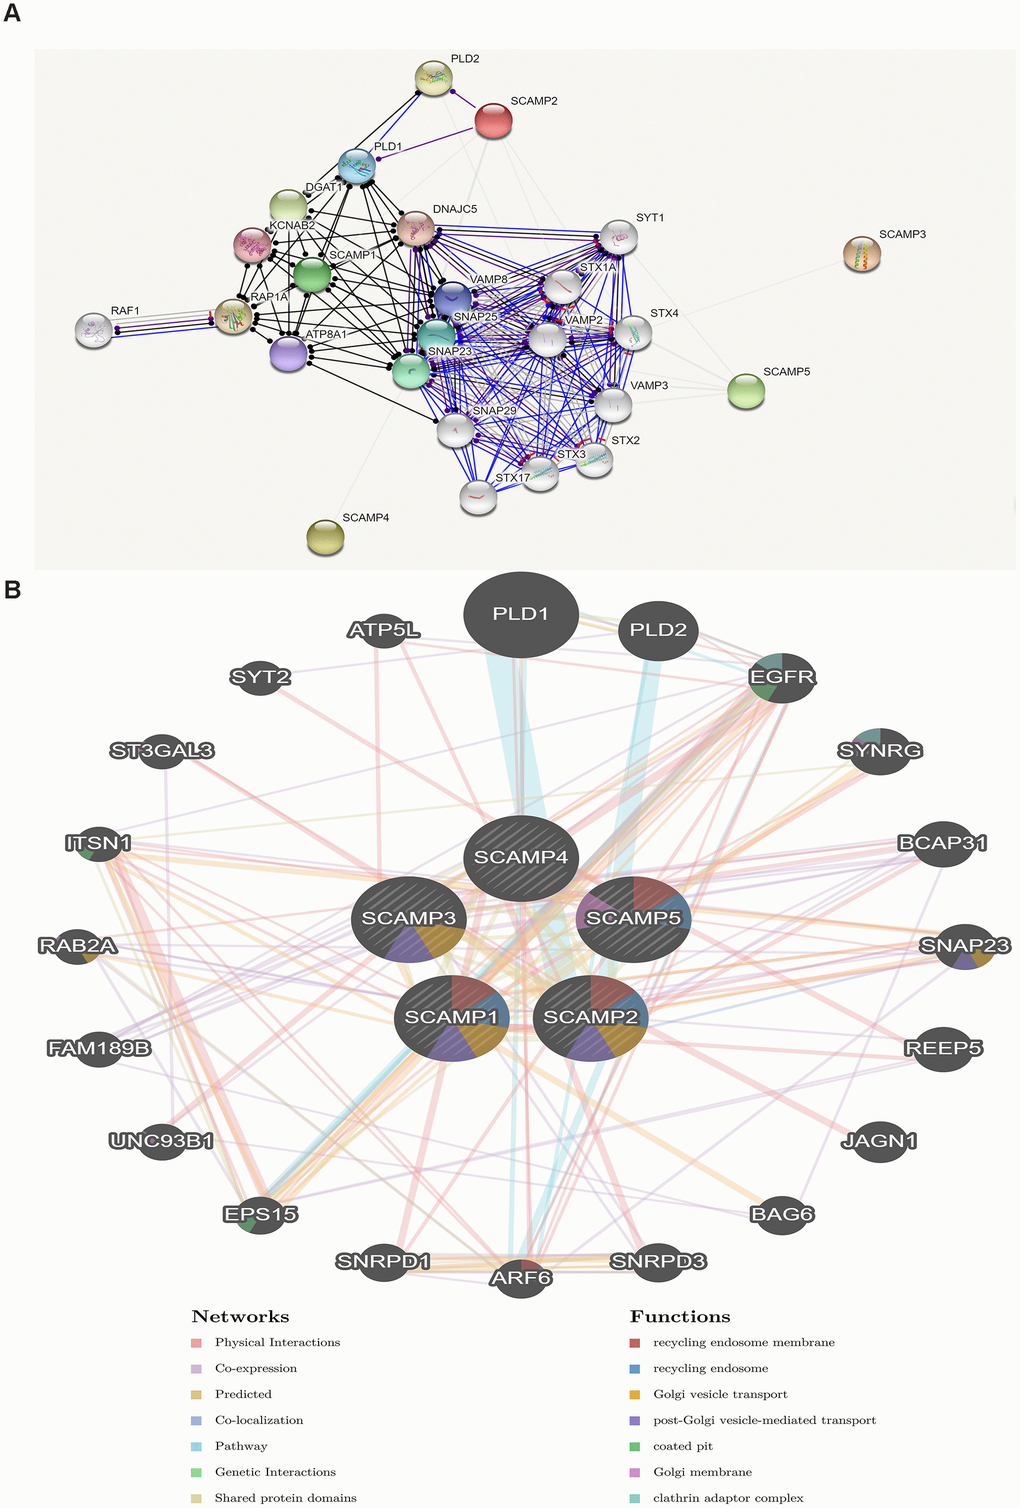 Protein-protein interaction network of SCAMPs (STRING, GeneMANIA). (A) Functional protein association networks of SCAMPs. Line shape indicated the predicted mode of molecular action. (B) Networks between predicted genes and SCAMP1-5. Different colors of the network edge indicate the bioinformatics methods applied: co-expression, website prediction, pathway, physical interactions and co-localization. Different colors for the network nodes indicate the biological functions of enrichment genes.